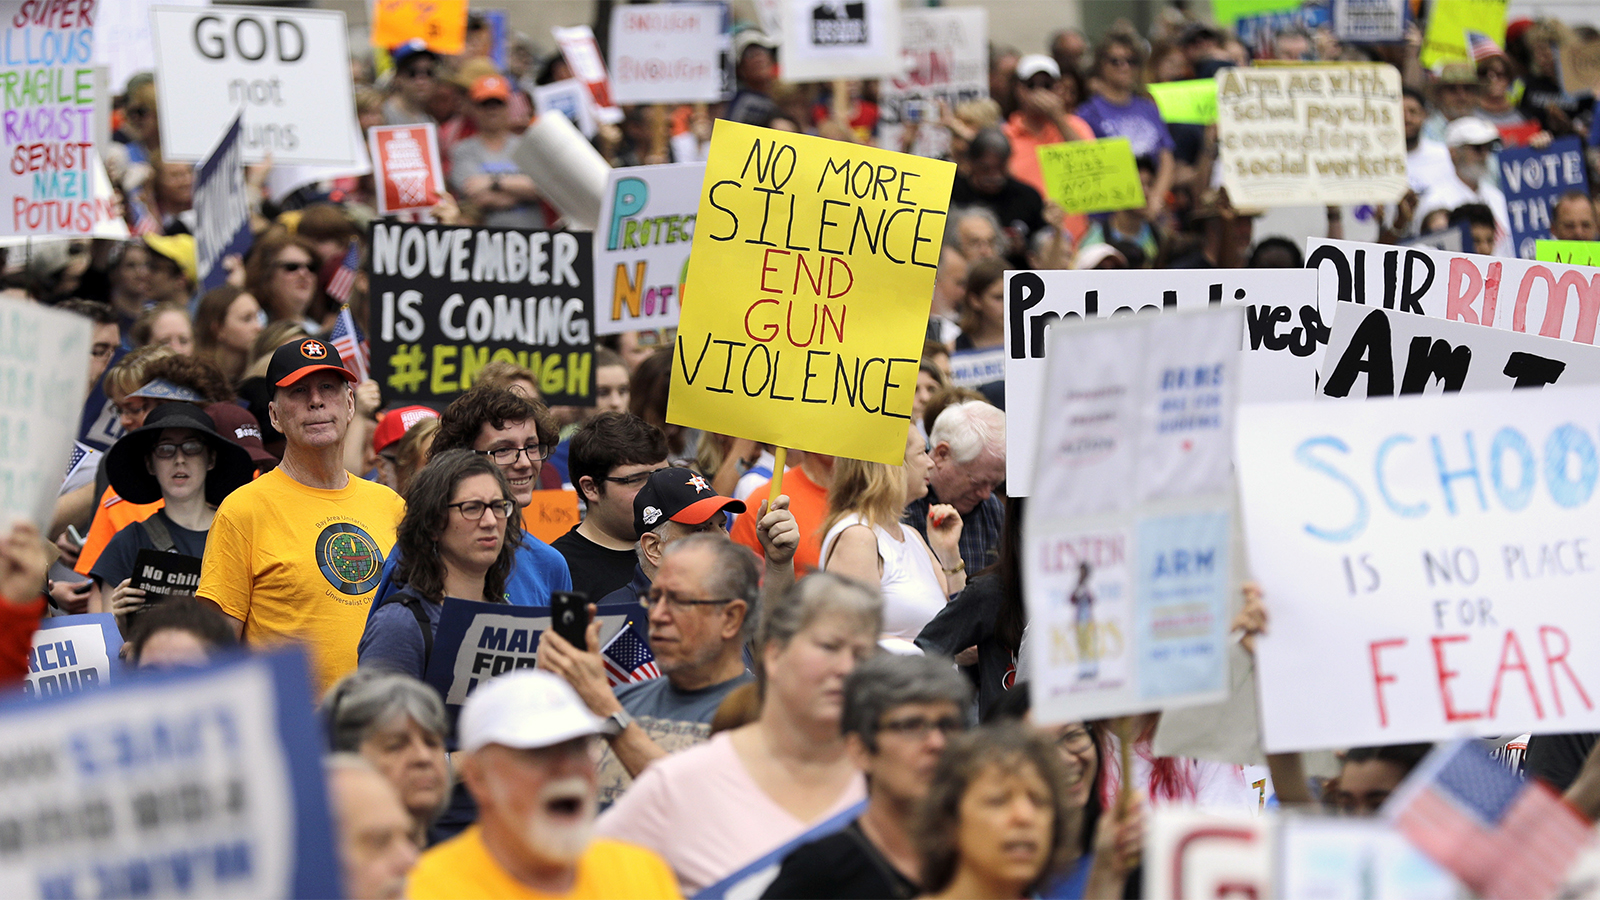 Demonstrators gather for a "March for Our Lives" protest for gun control legislation and school safety on March 24, 2018, in Houston. Students and activists across the country planned events in conjunction with a Washington march spearheaded by teens from Marjory Stoneman Douglas High School in Parkland, Fla., where more than a dozen people were killed in February. (AP Photo/David J. Phillip)